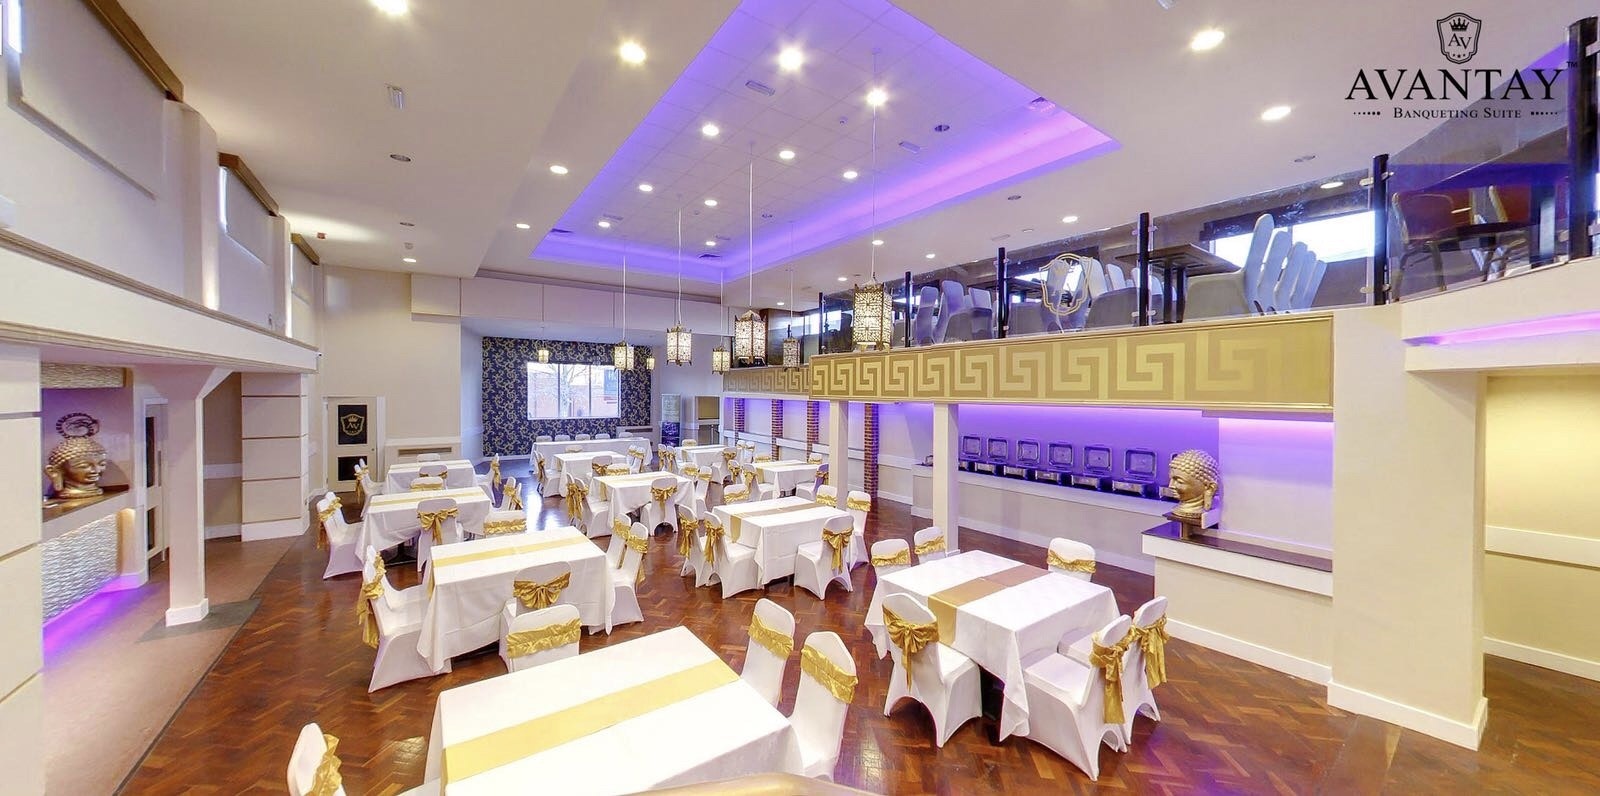 Avantay banqueting suite - Corporate image 3